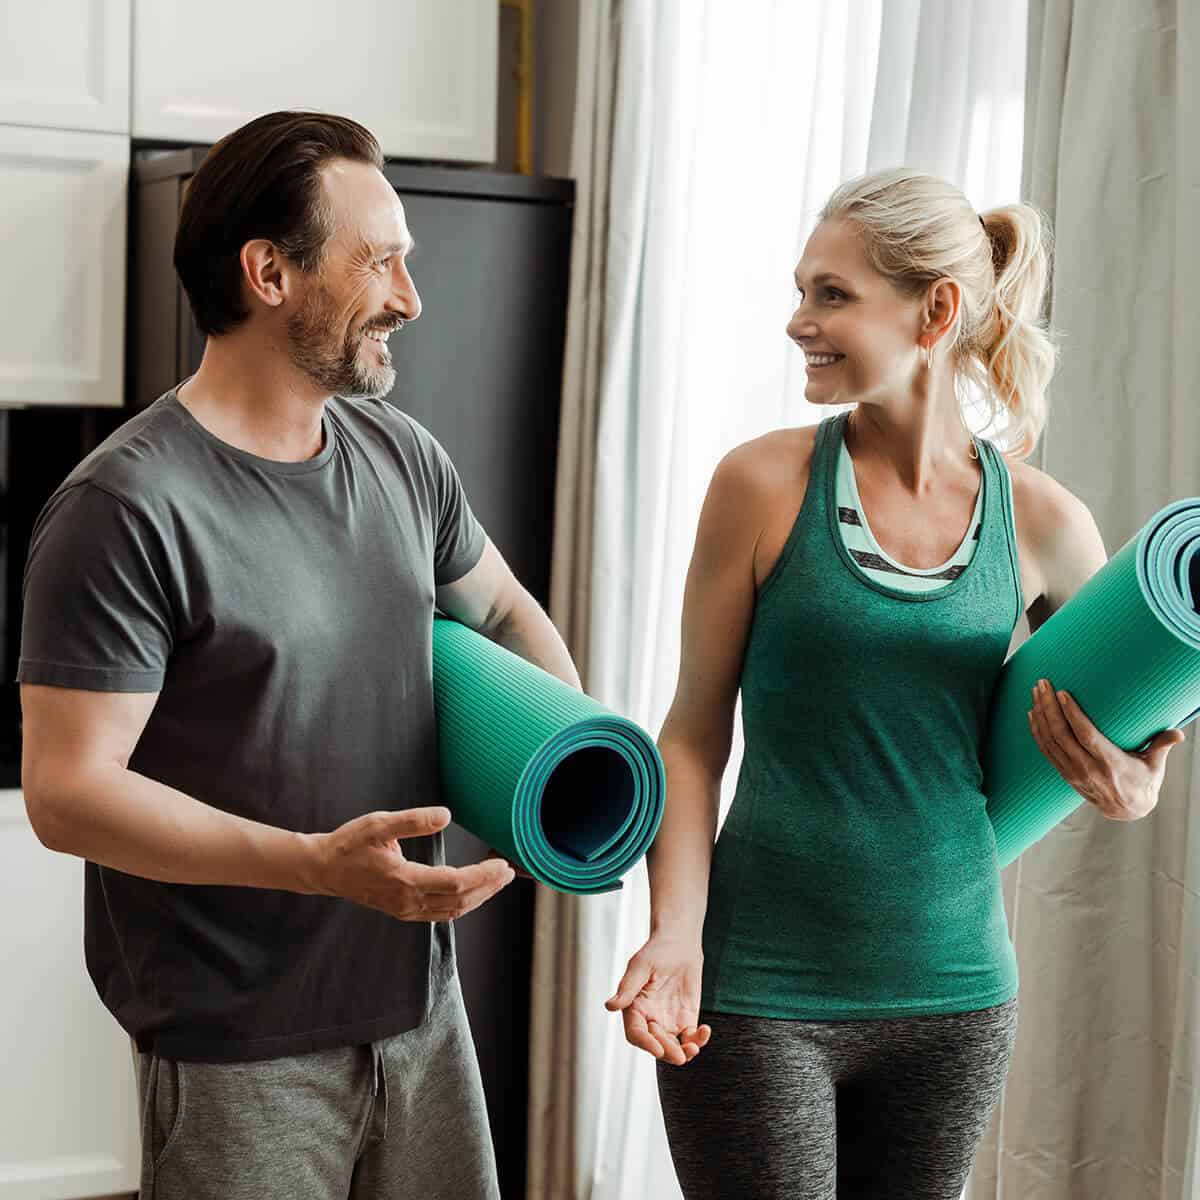 Mature couple in fitness clothes holding exercise mats and smiling at each other